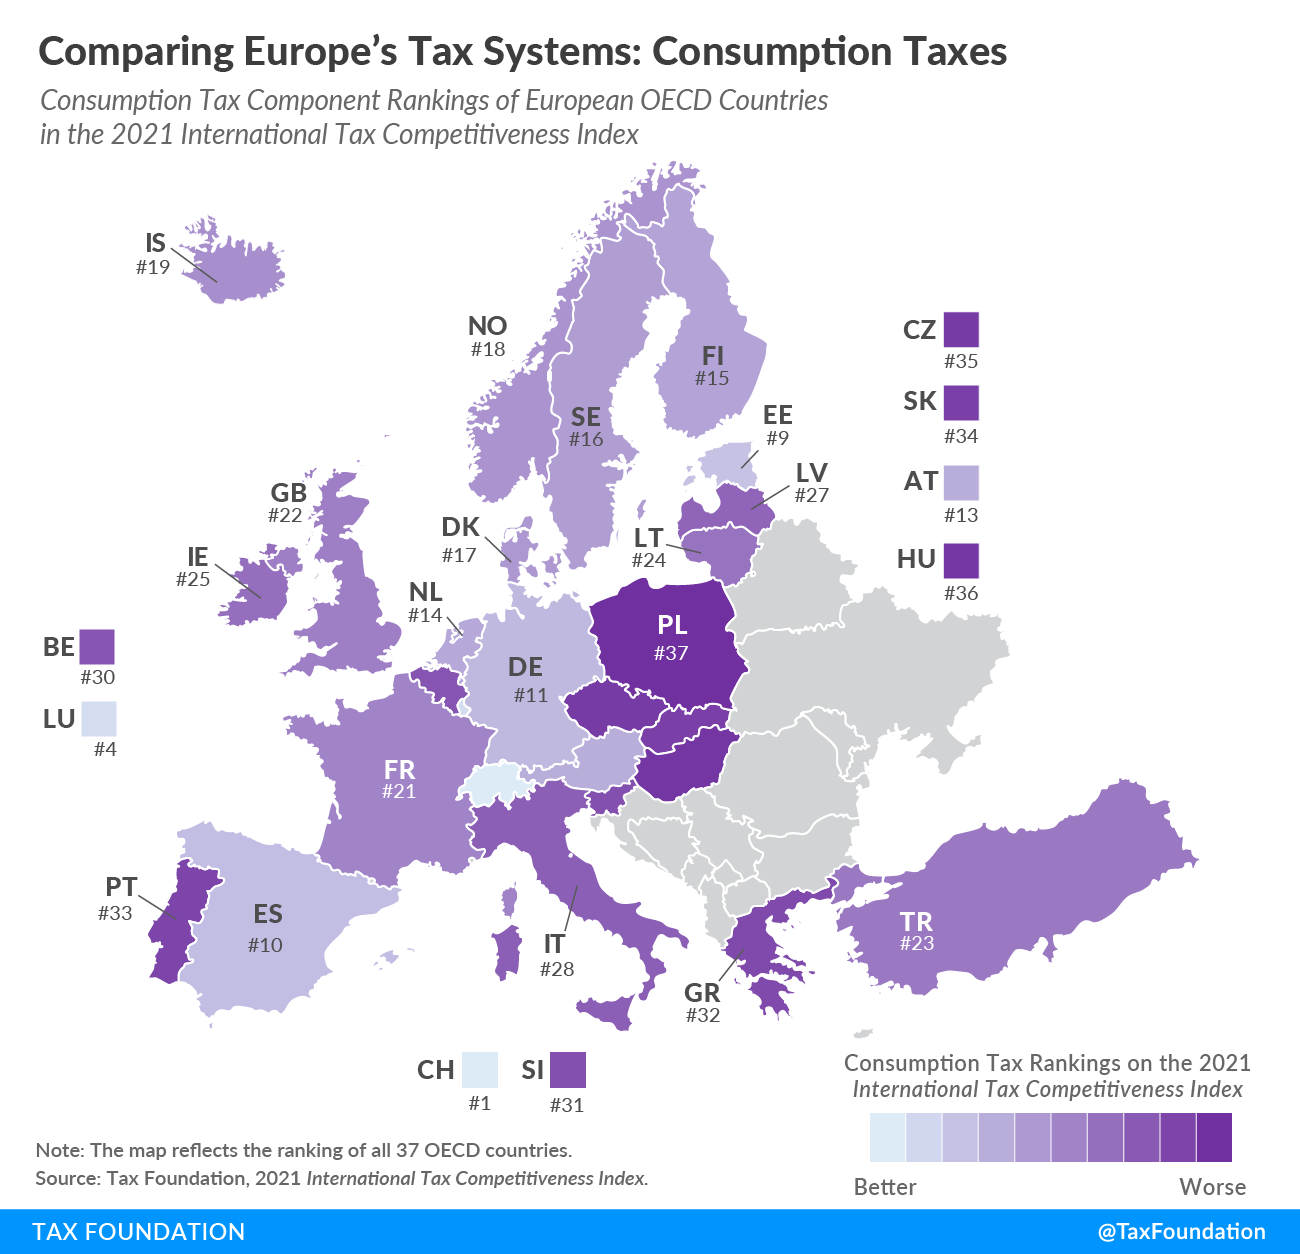 2021 Consumption Tax Systems in Europe Comparing Consumption Tax Systems in Europe 2021 worst Consumption tax systems in Europe Consumption taxes in Europe